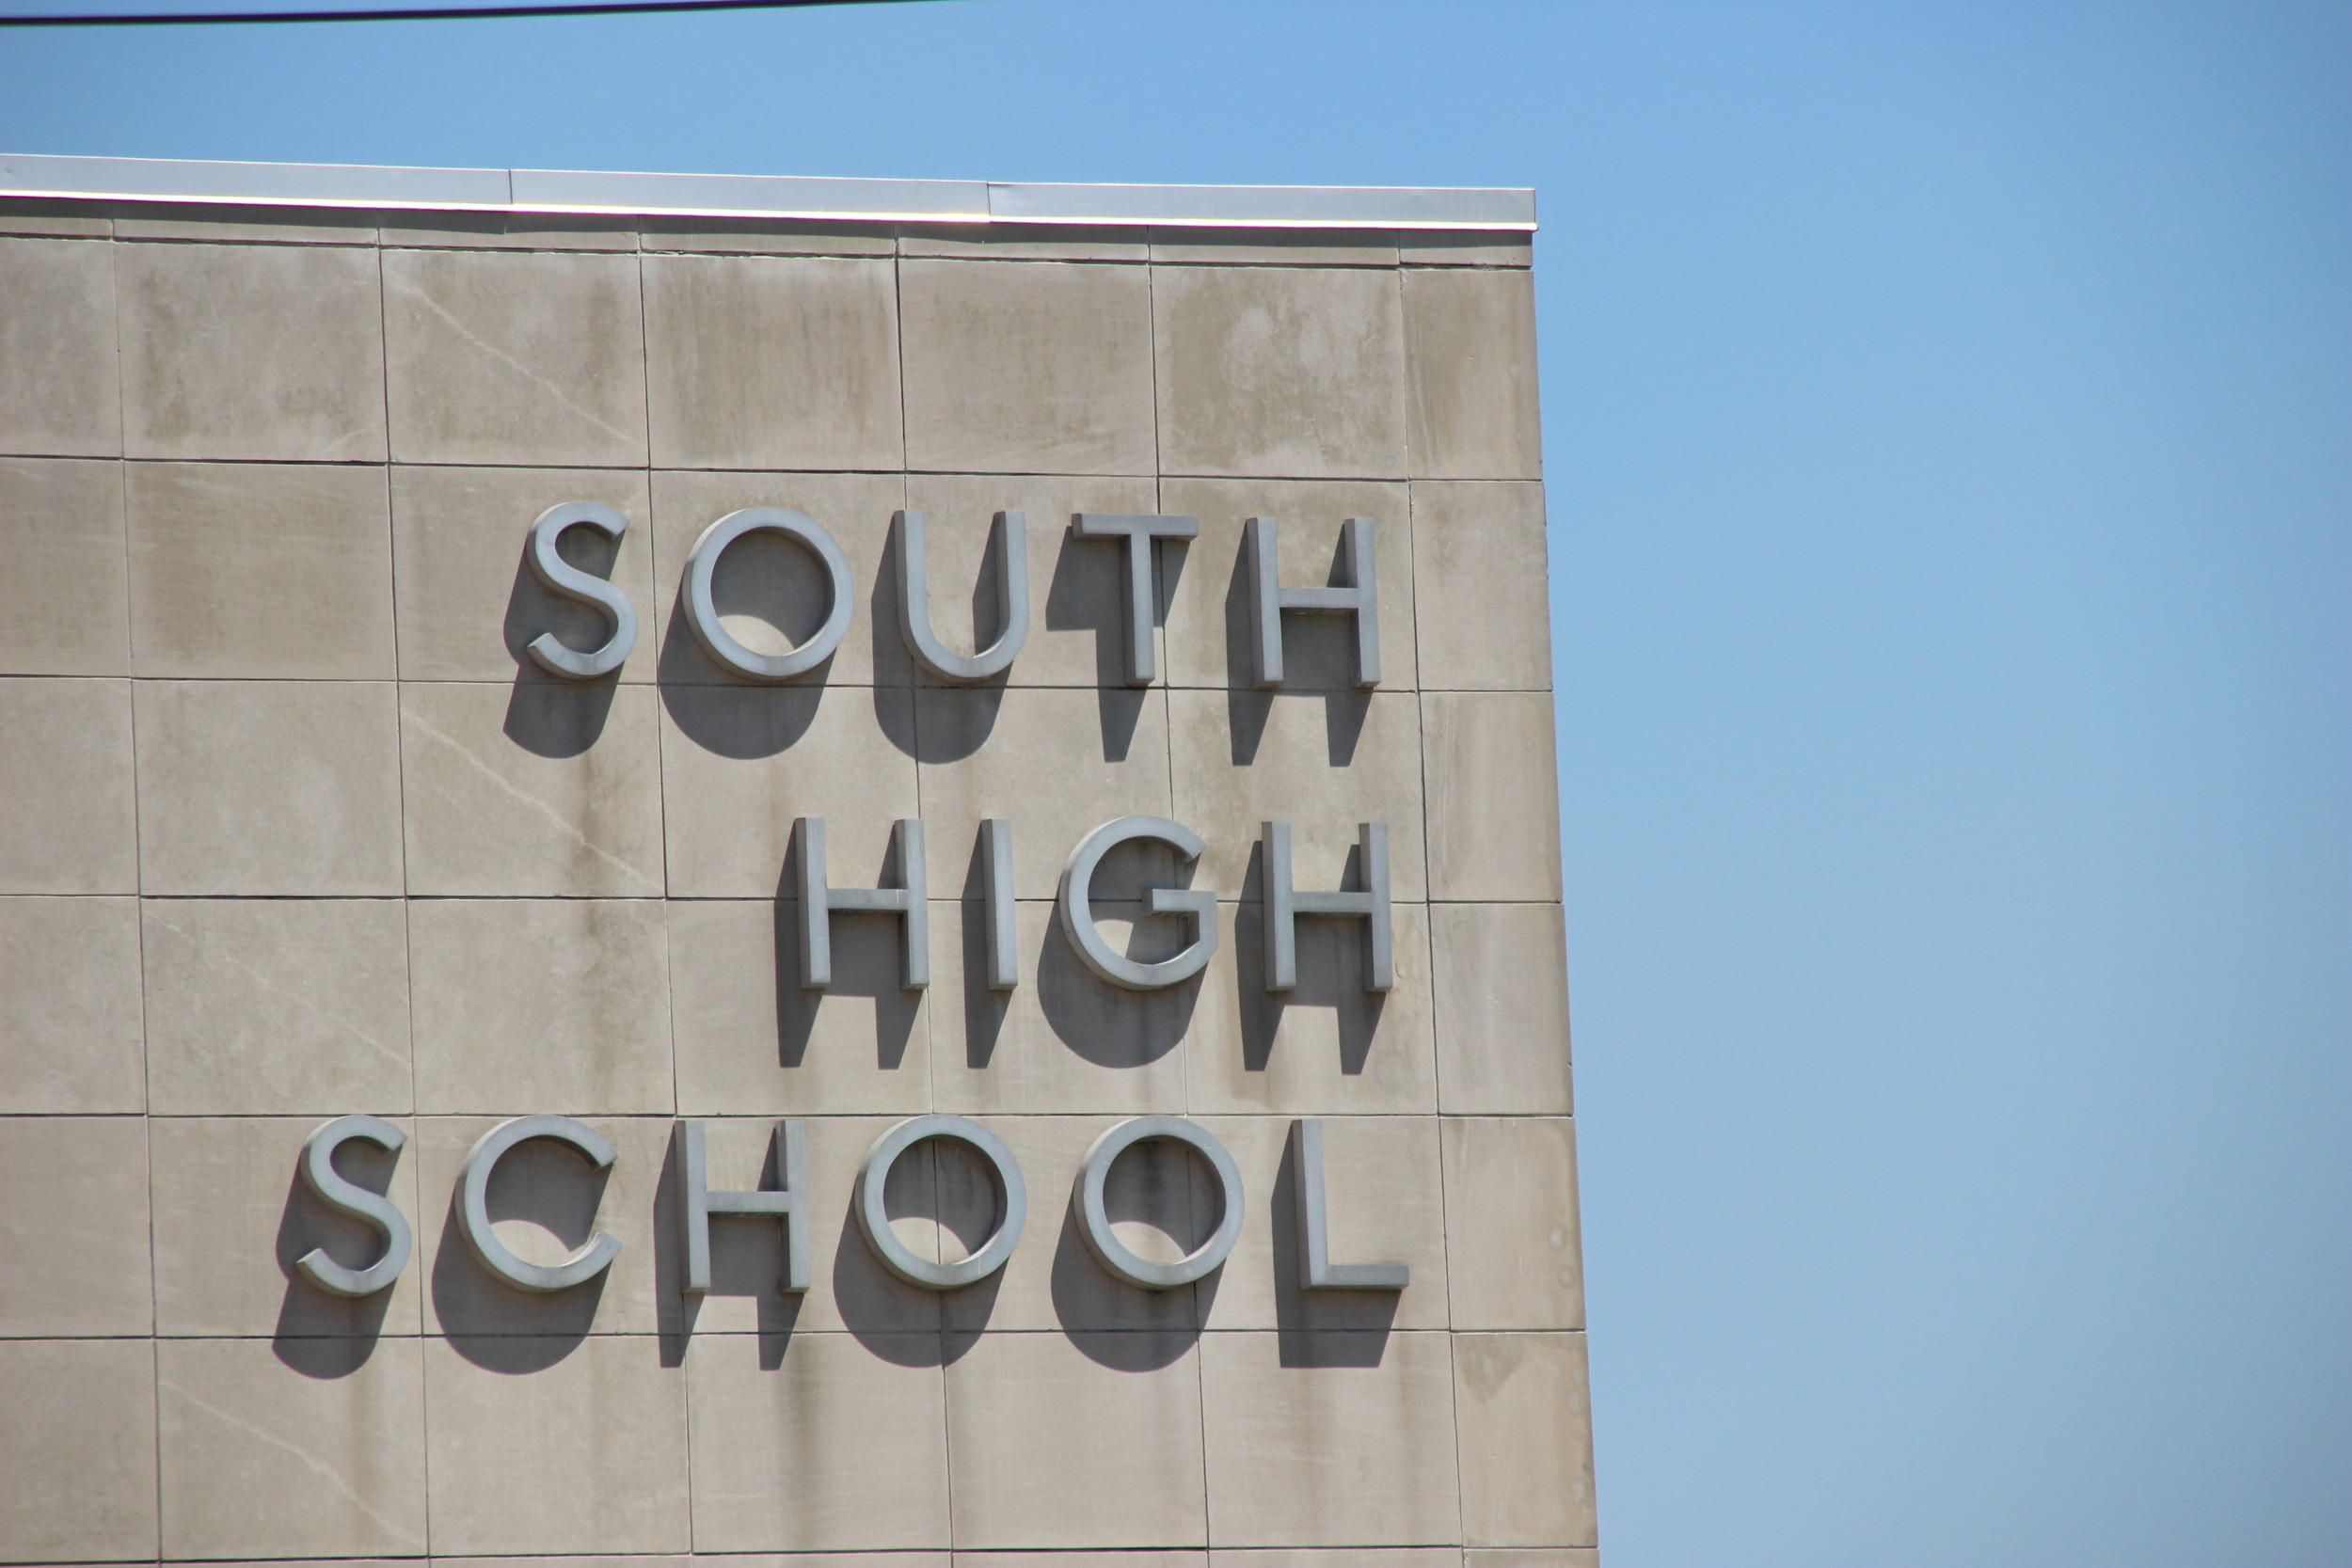 Students at South High School petitioned Principal Maureen Henry and Superintendent Bill Heidenreich to reinstate a project that was stopped.